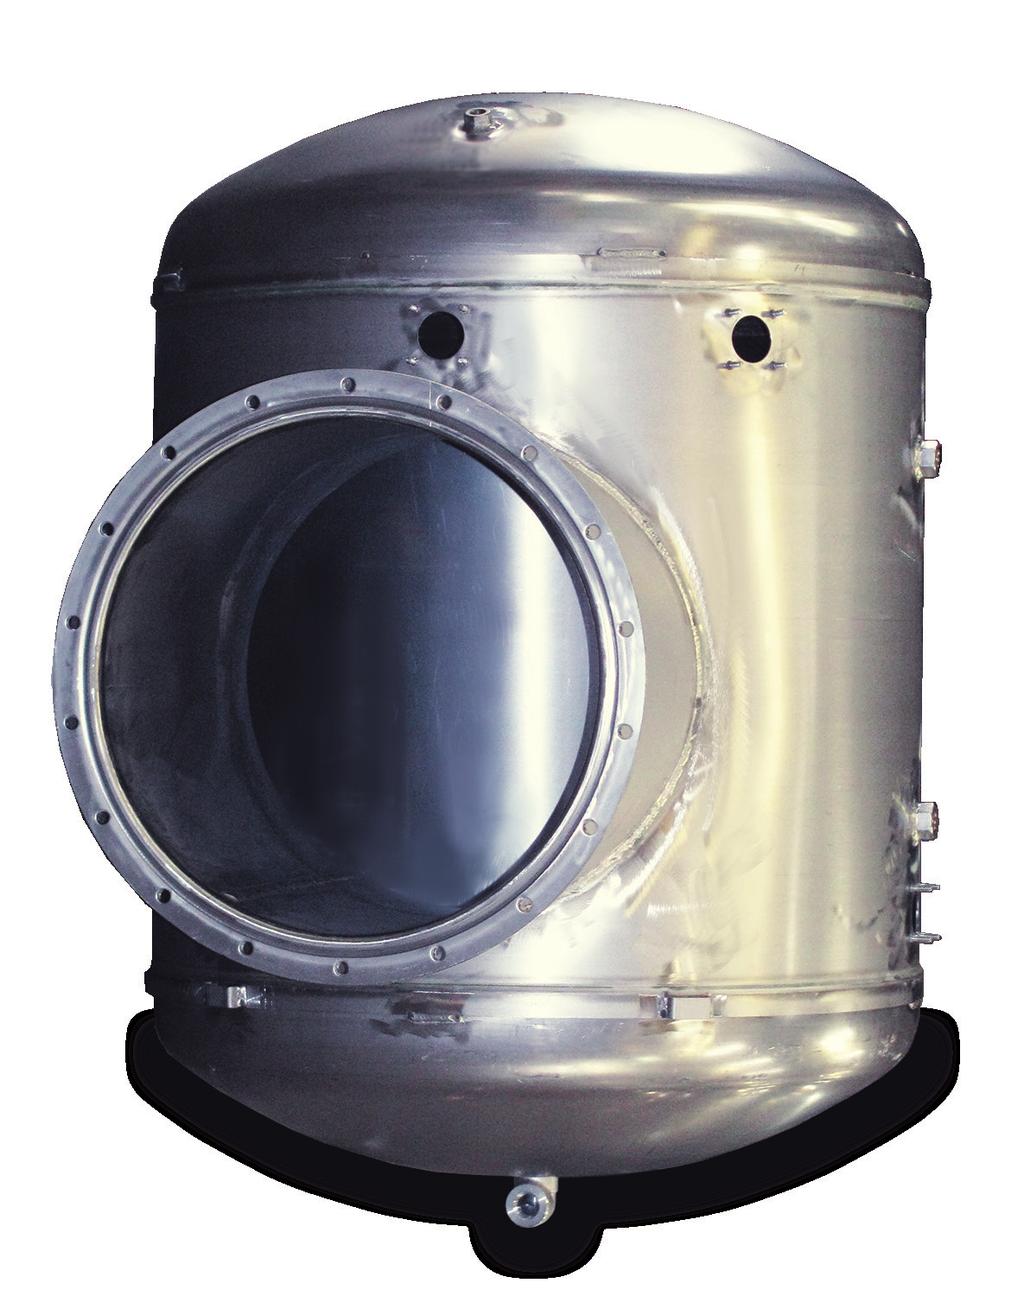 The AquaPLEX tank is fully pickle-passivated after complete fabrication and is naturally immune to corrosion in potable water regardless of temperature.